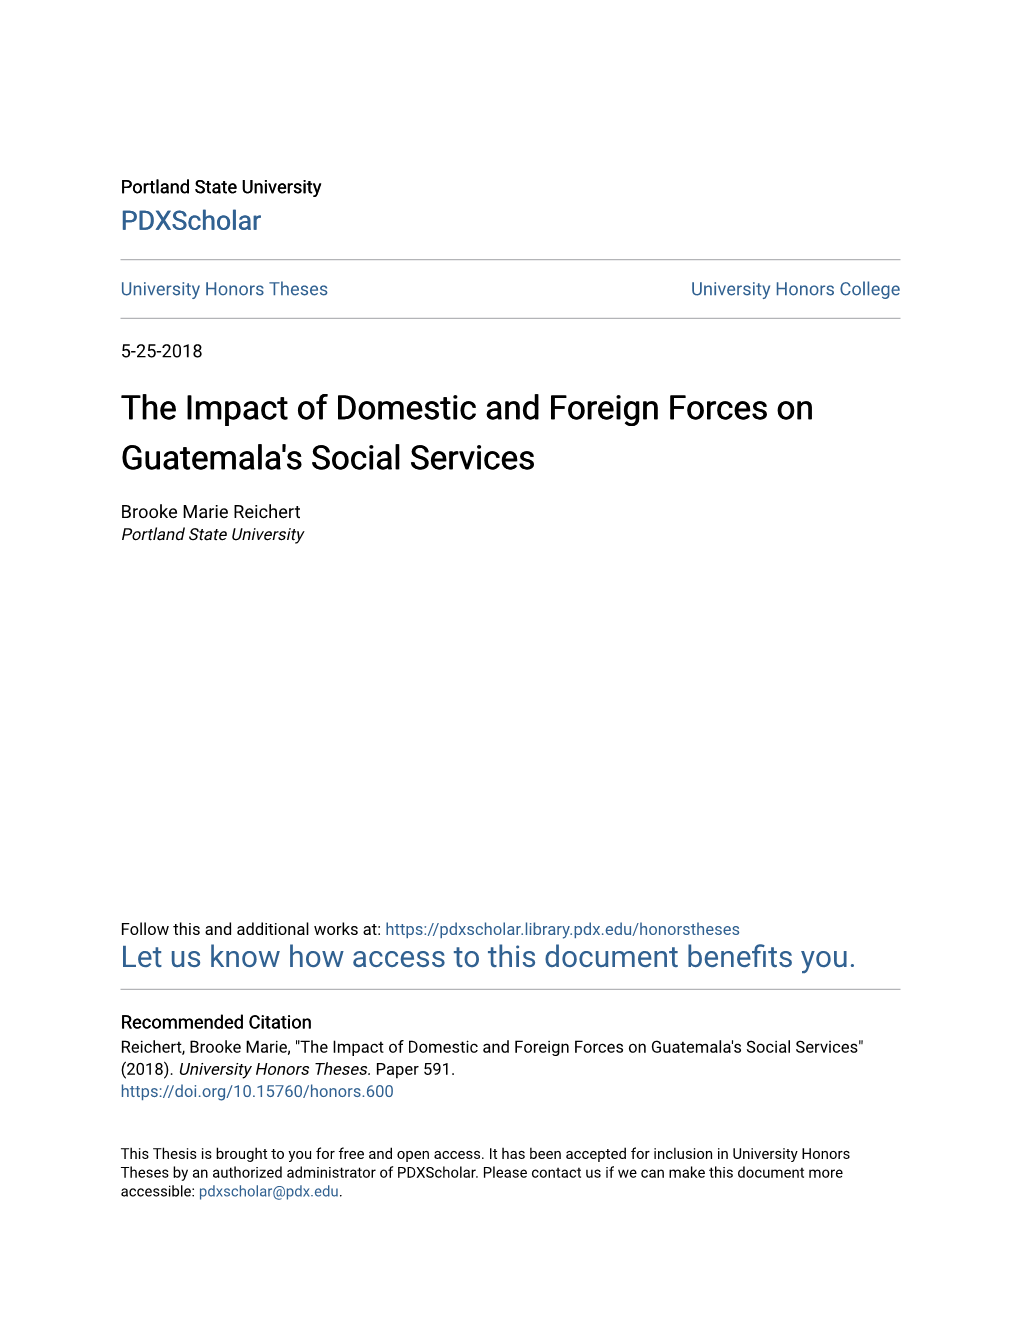 The Impact of Domestic and Foreign Forces on Guatemala's Social Services